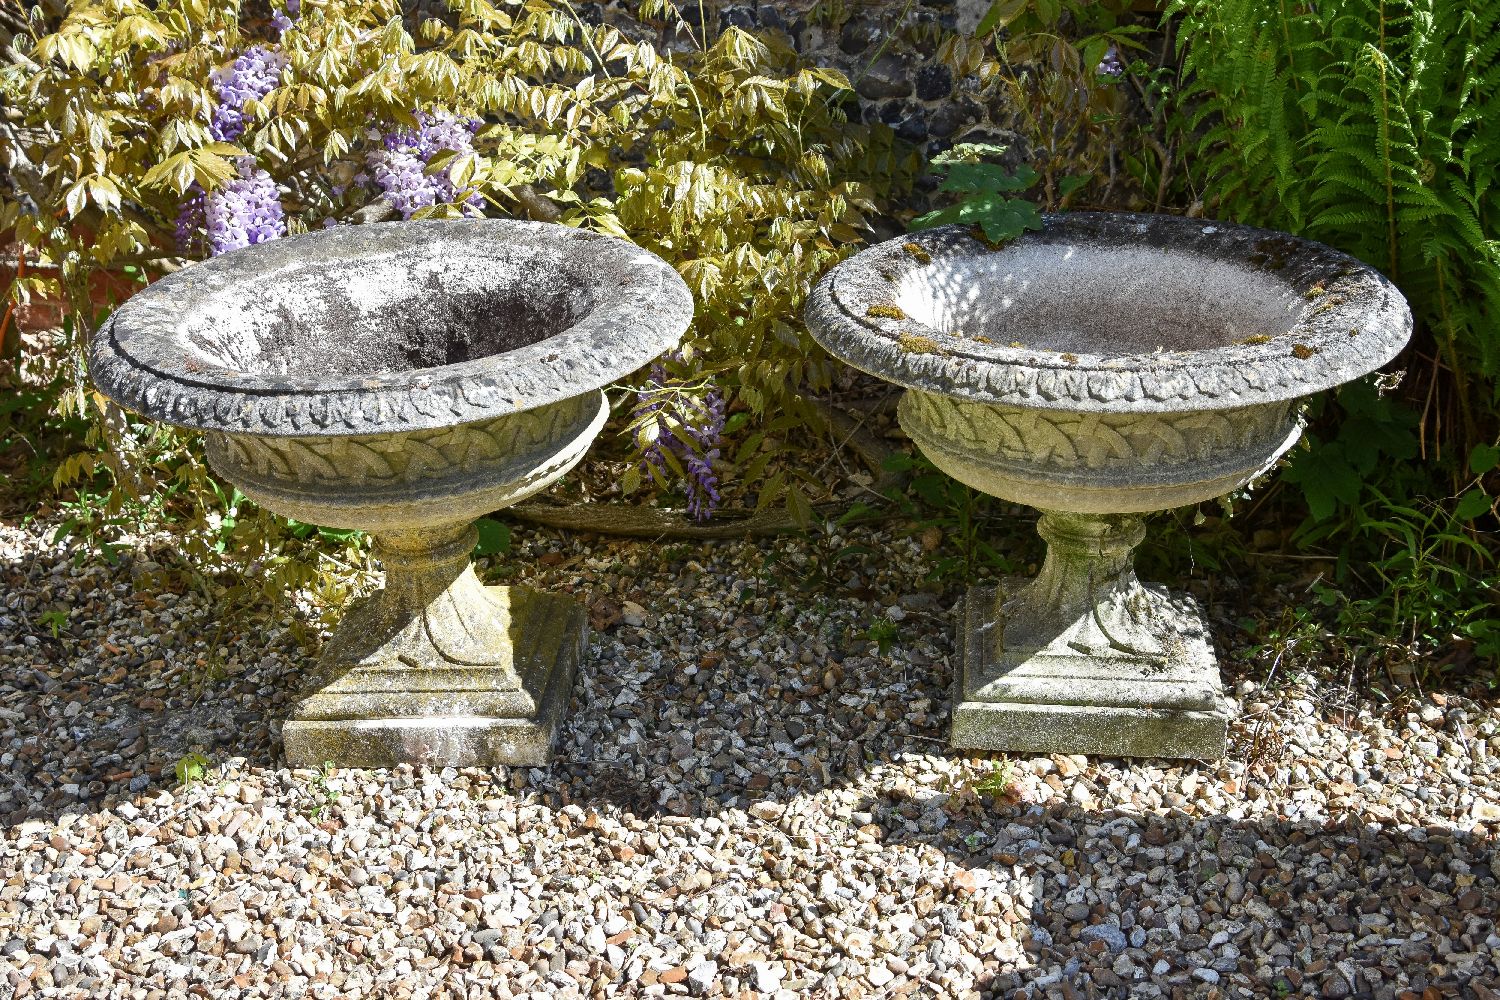 A pair of stone composition garden urns, second half 20th century, with everted rims above lattice